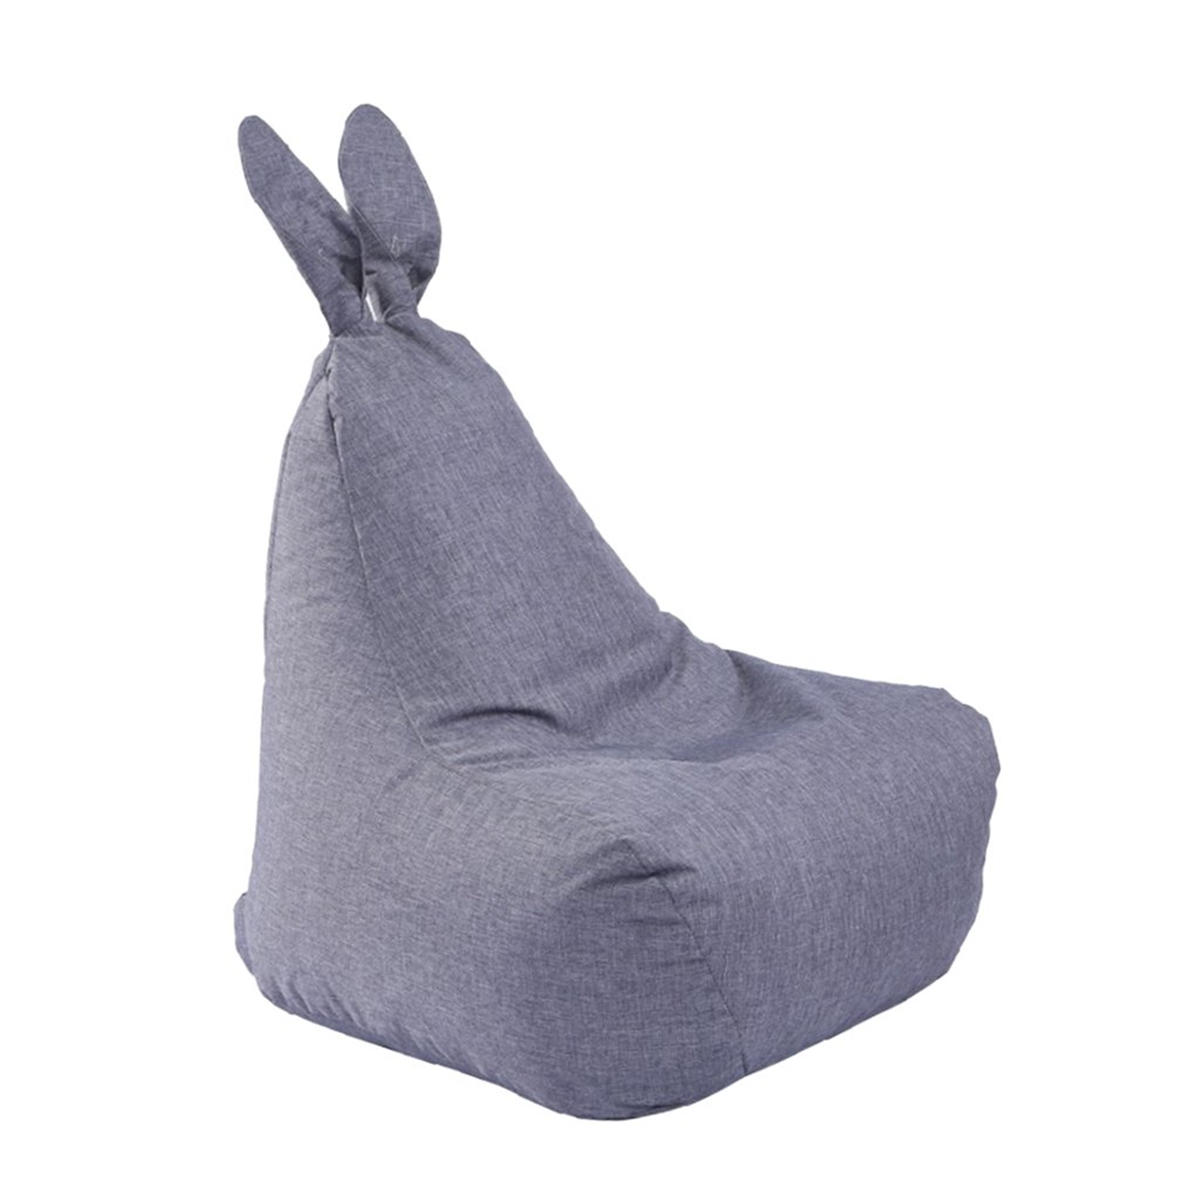 Rabbit Shape Bean Bag Chair Seat Sofa Cover For S Kids Without Filling Home Room Banggood Com Arrival Notice - How To Shape A Chair Seat